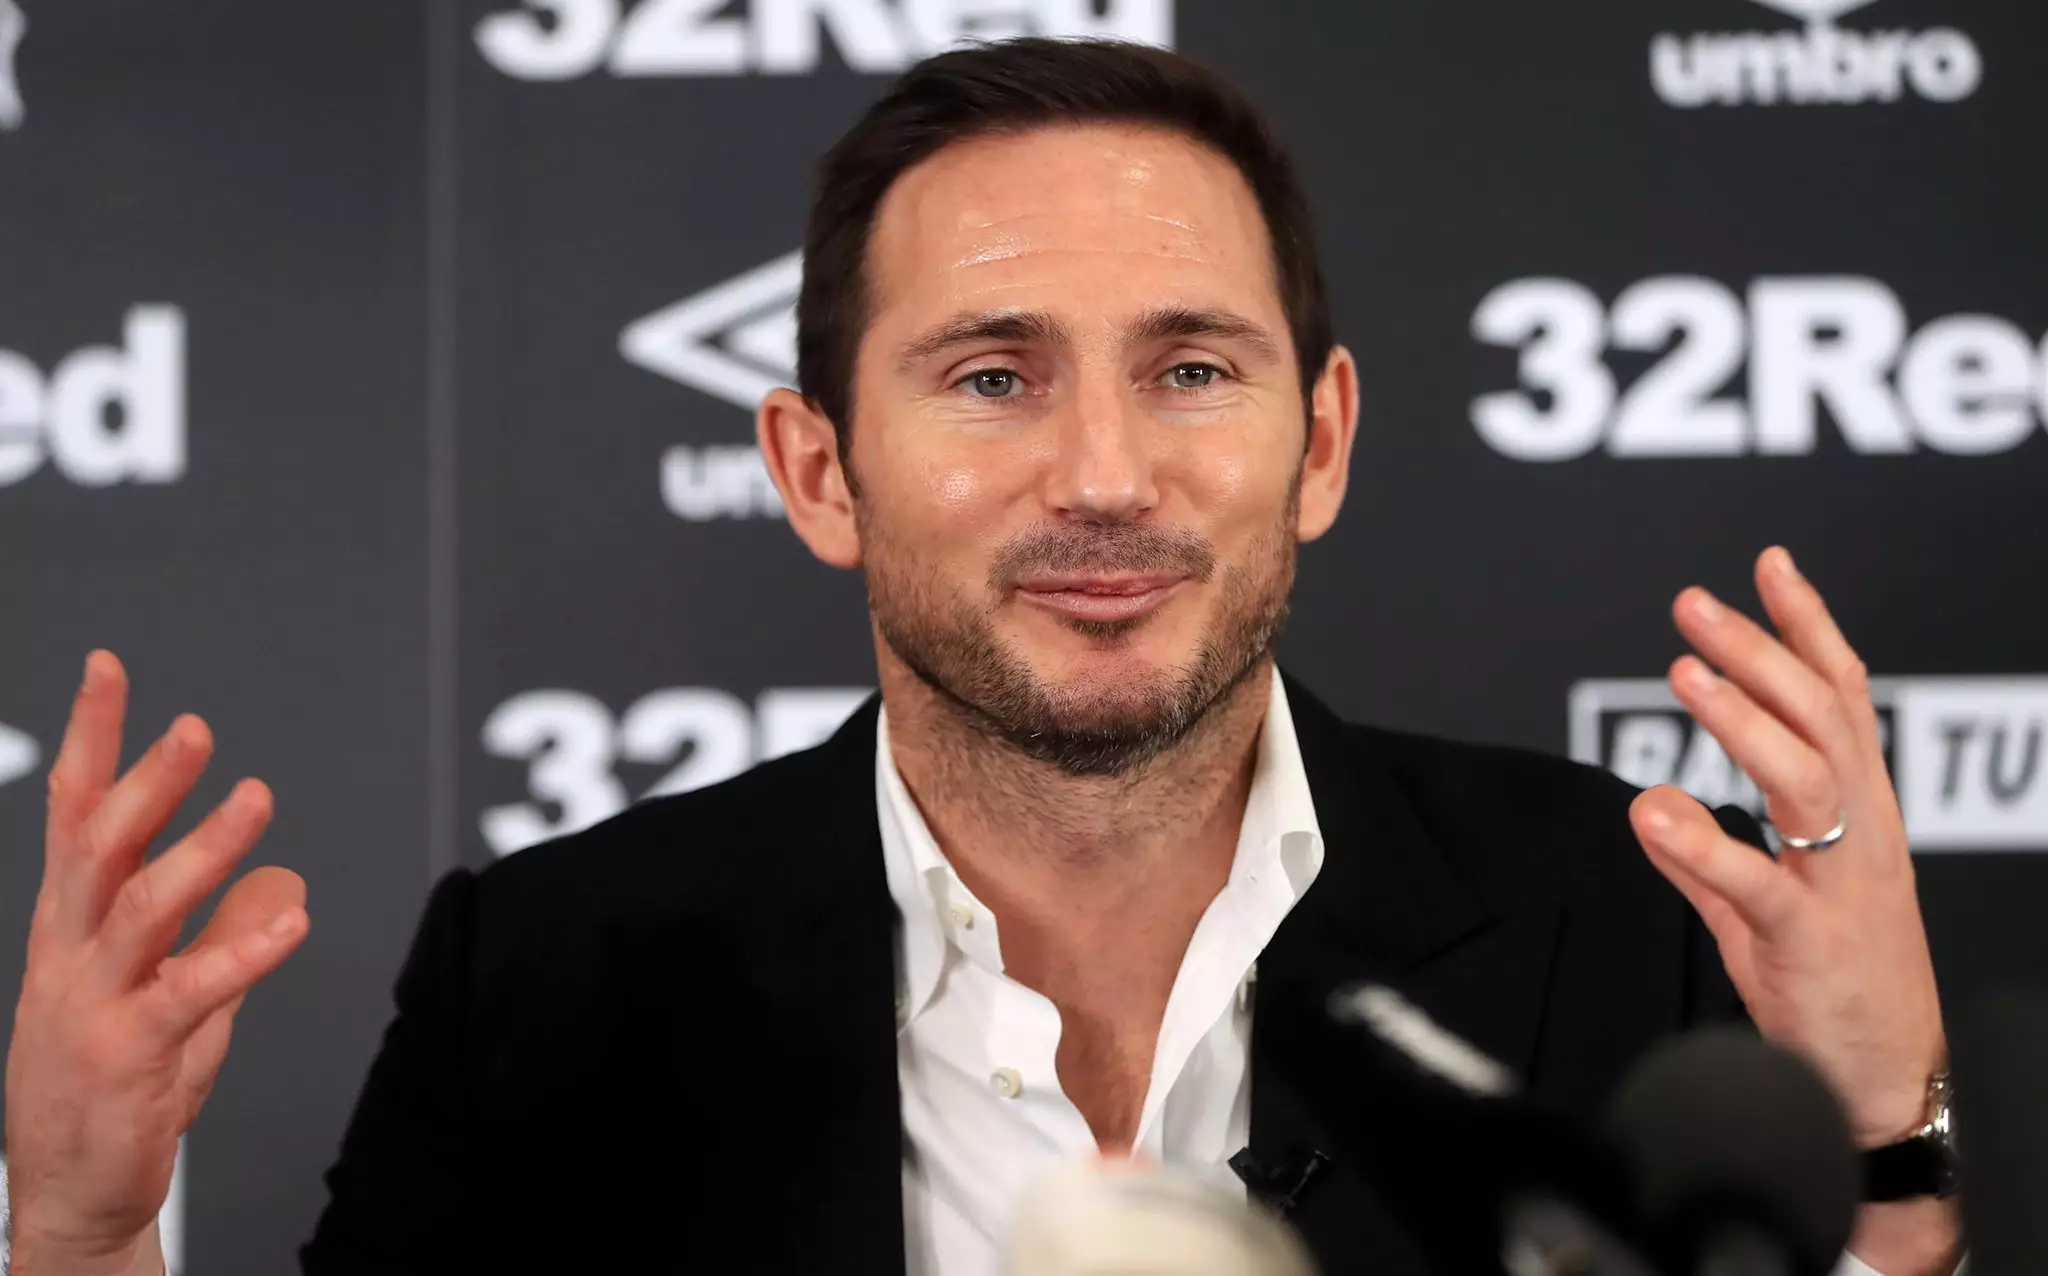 Lampard took over as Derby boss last season. Image: PA Images